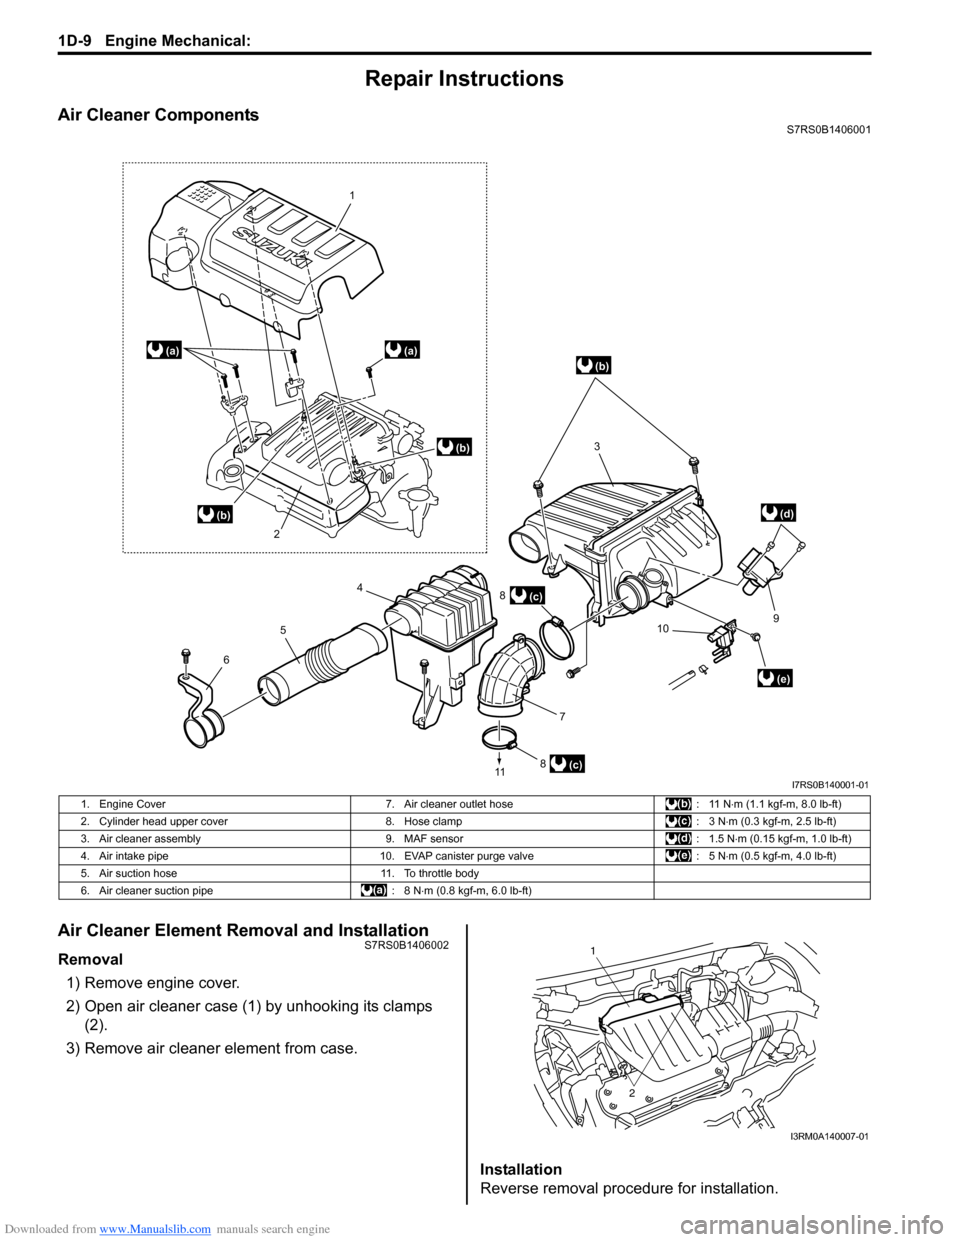 SUZUKI SWIFT 2008 2.G Service Workshop Manual Downloaded from www.Manualslib.com manuals search engine 1D-9 Engine Mechanical: 
Repair Instructions
Air Cleaner ComponentsS7RS0B1406001
Air Cleaner Element Removal and InstallationS7RS0B1406002
Remo